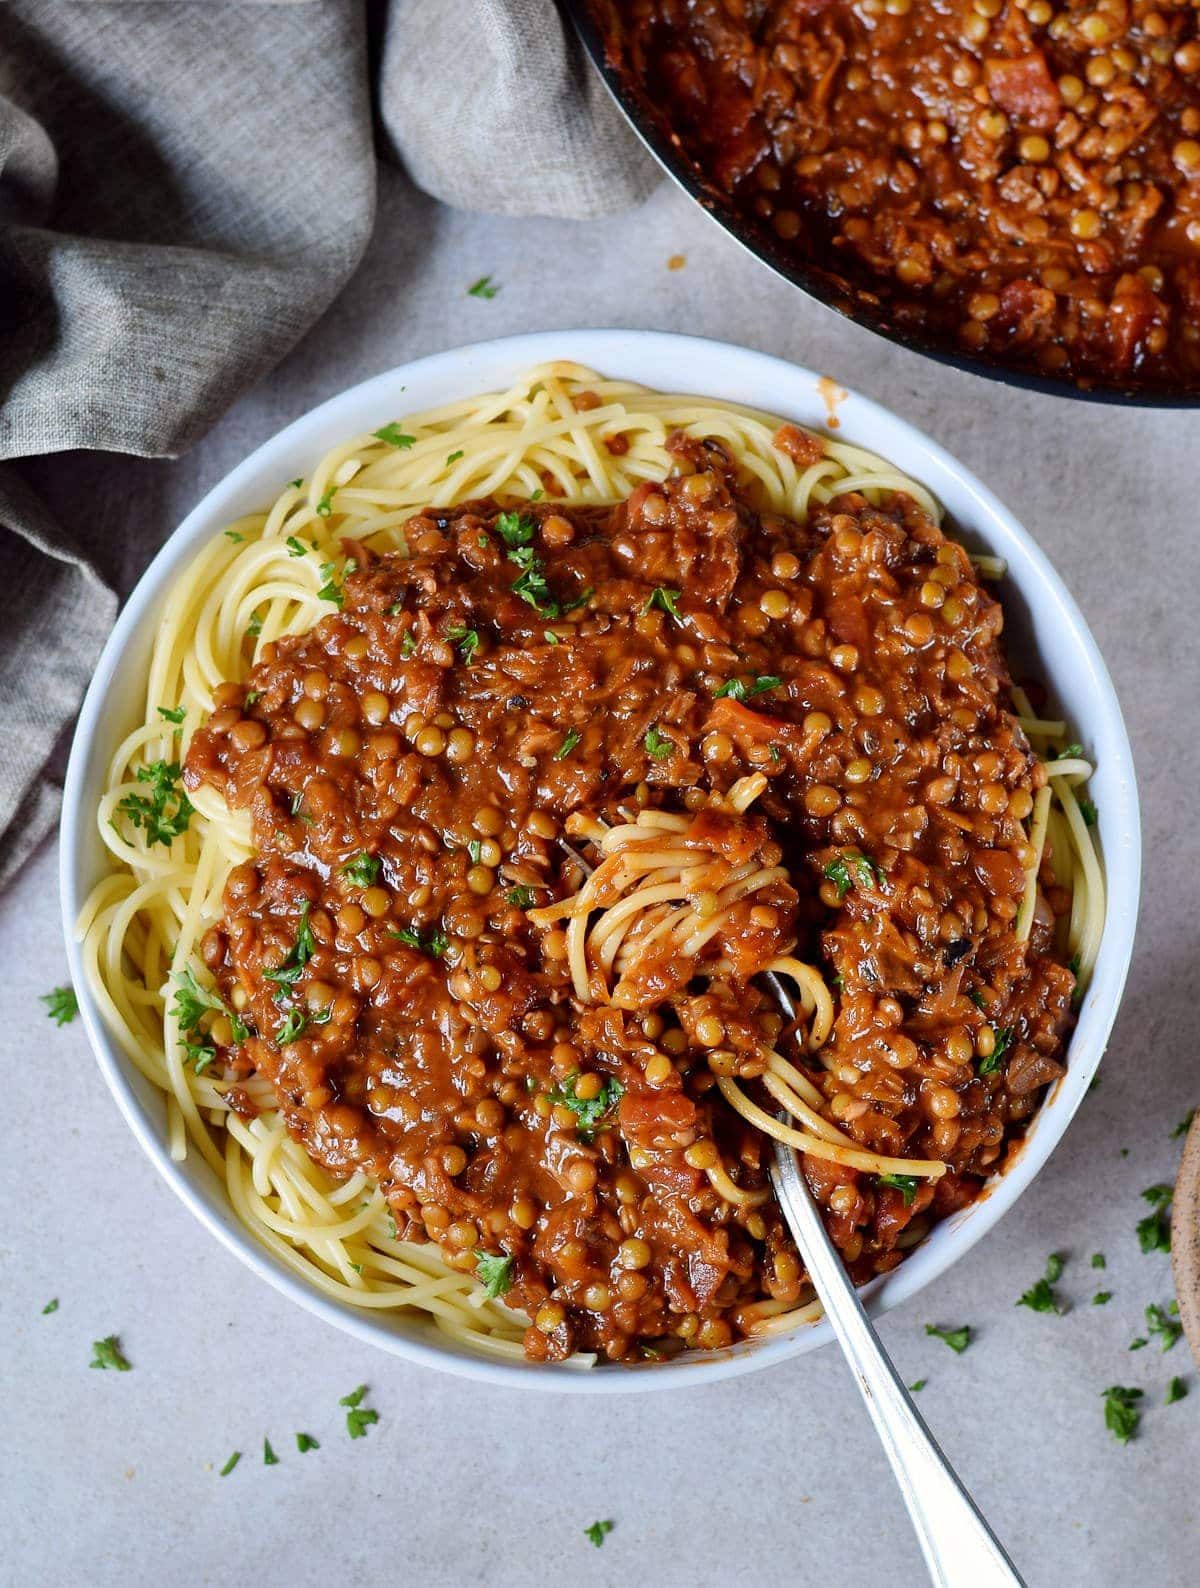 meat-free bolognese sauce over spaghetti